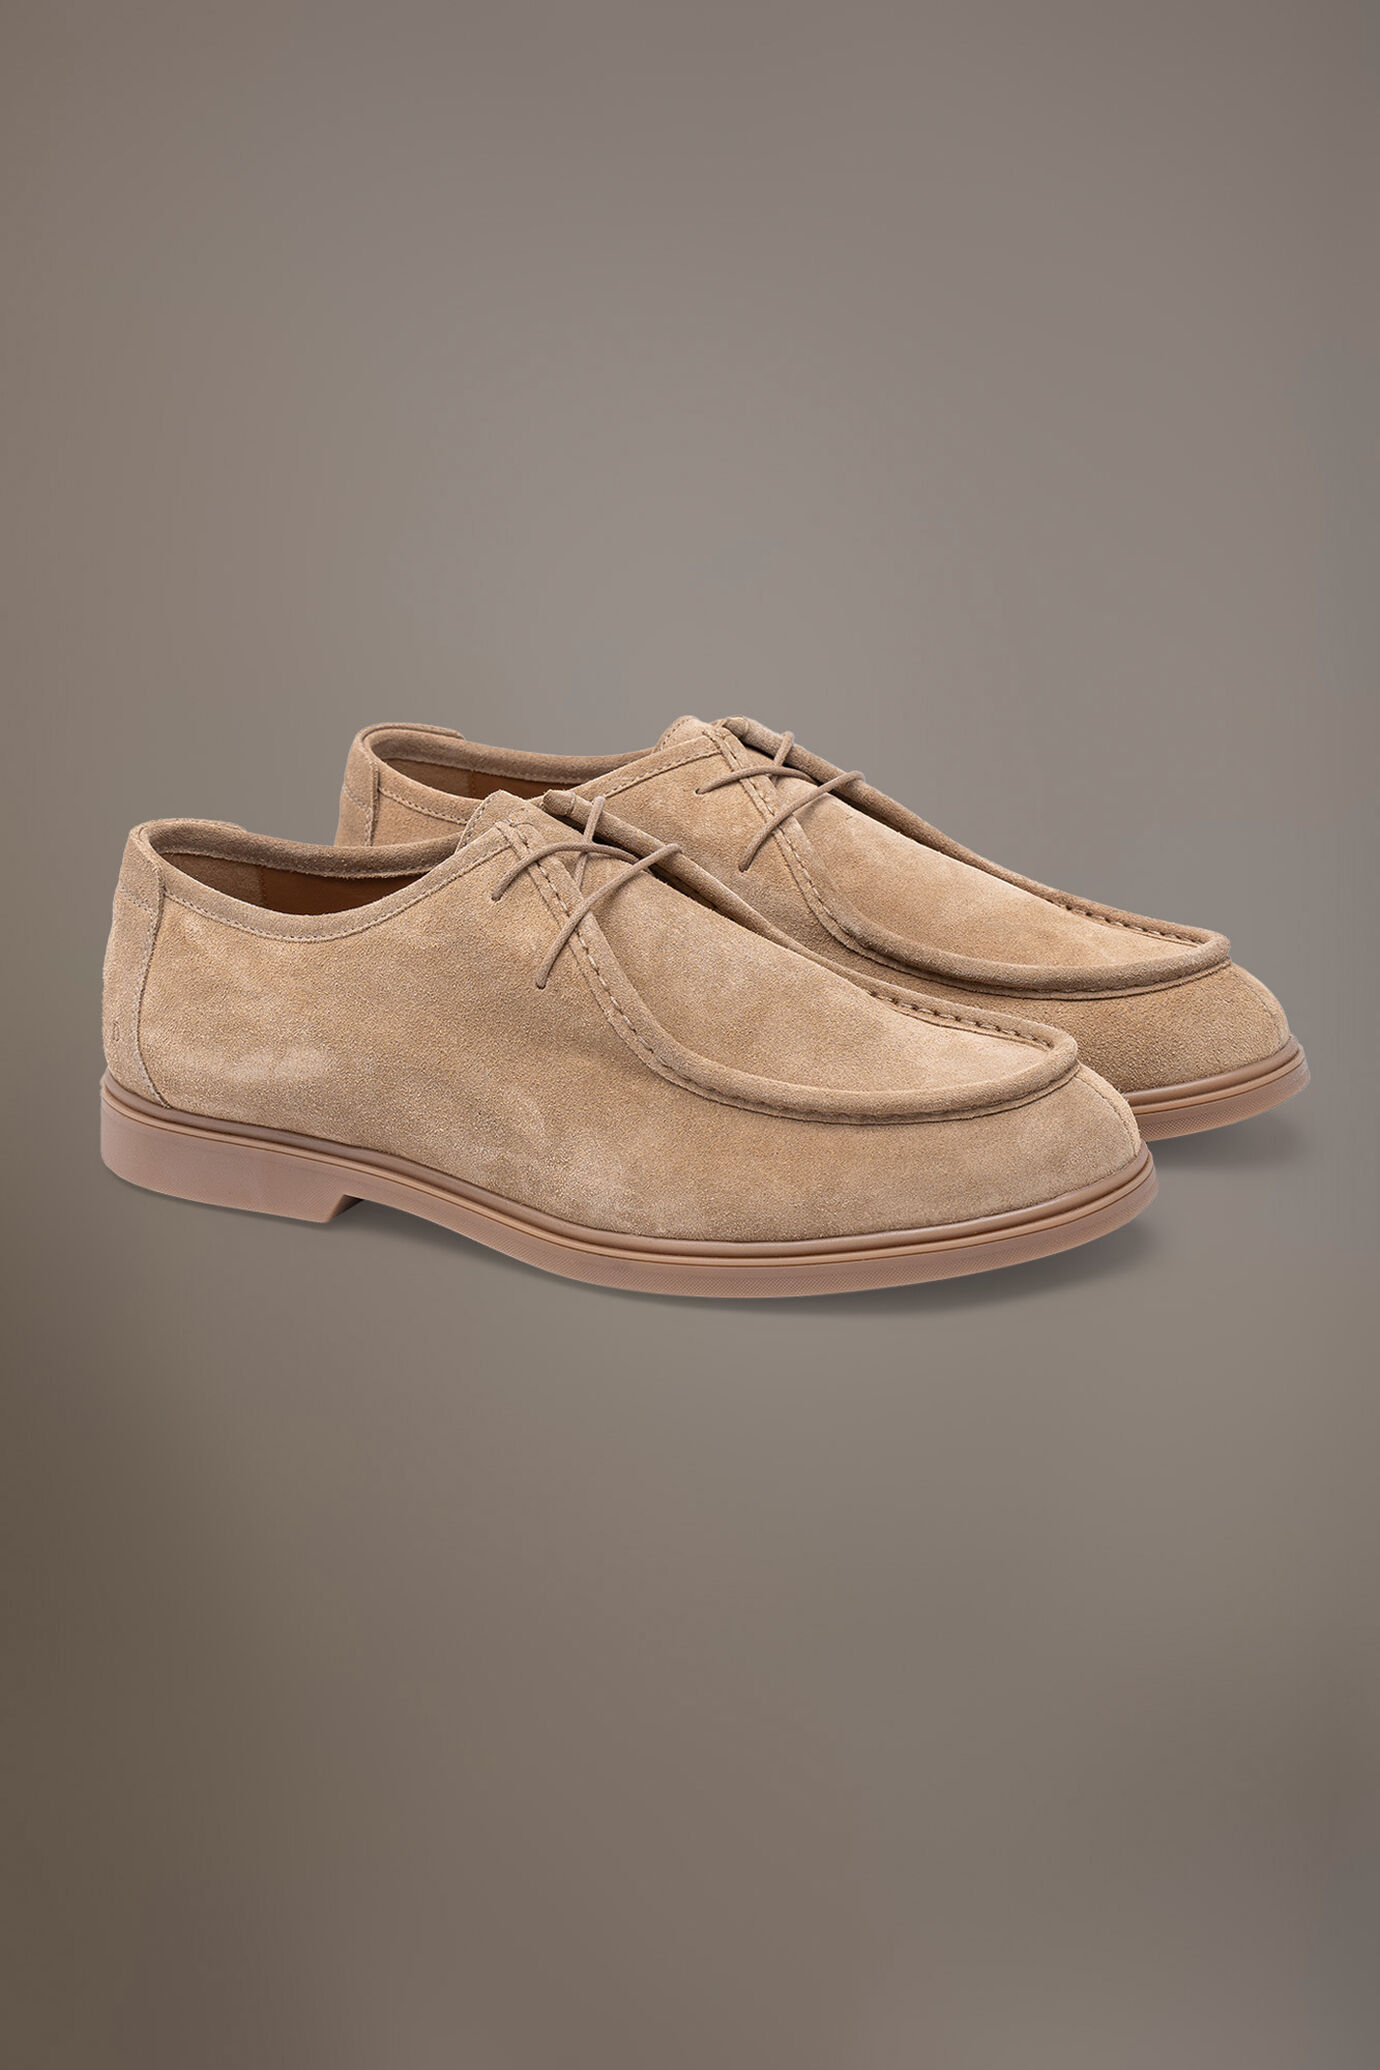 Suede ranger shoes 100% leather with rubber sole